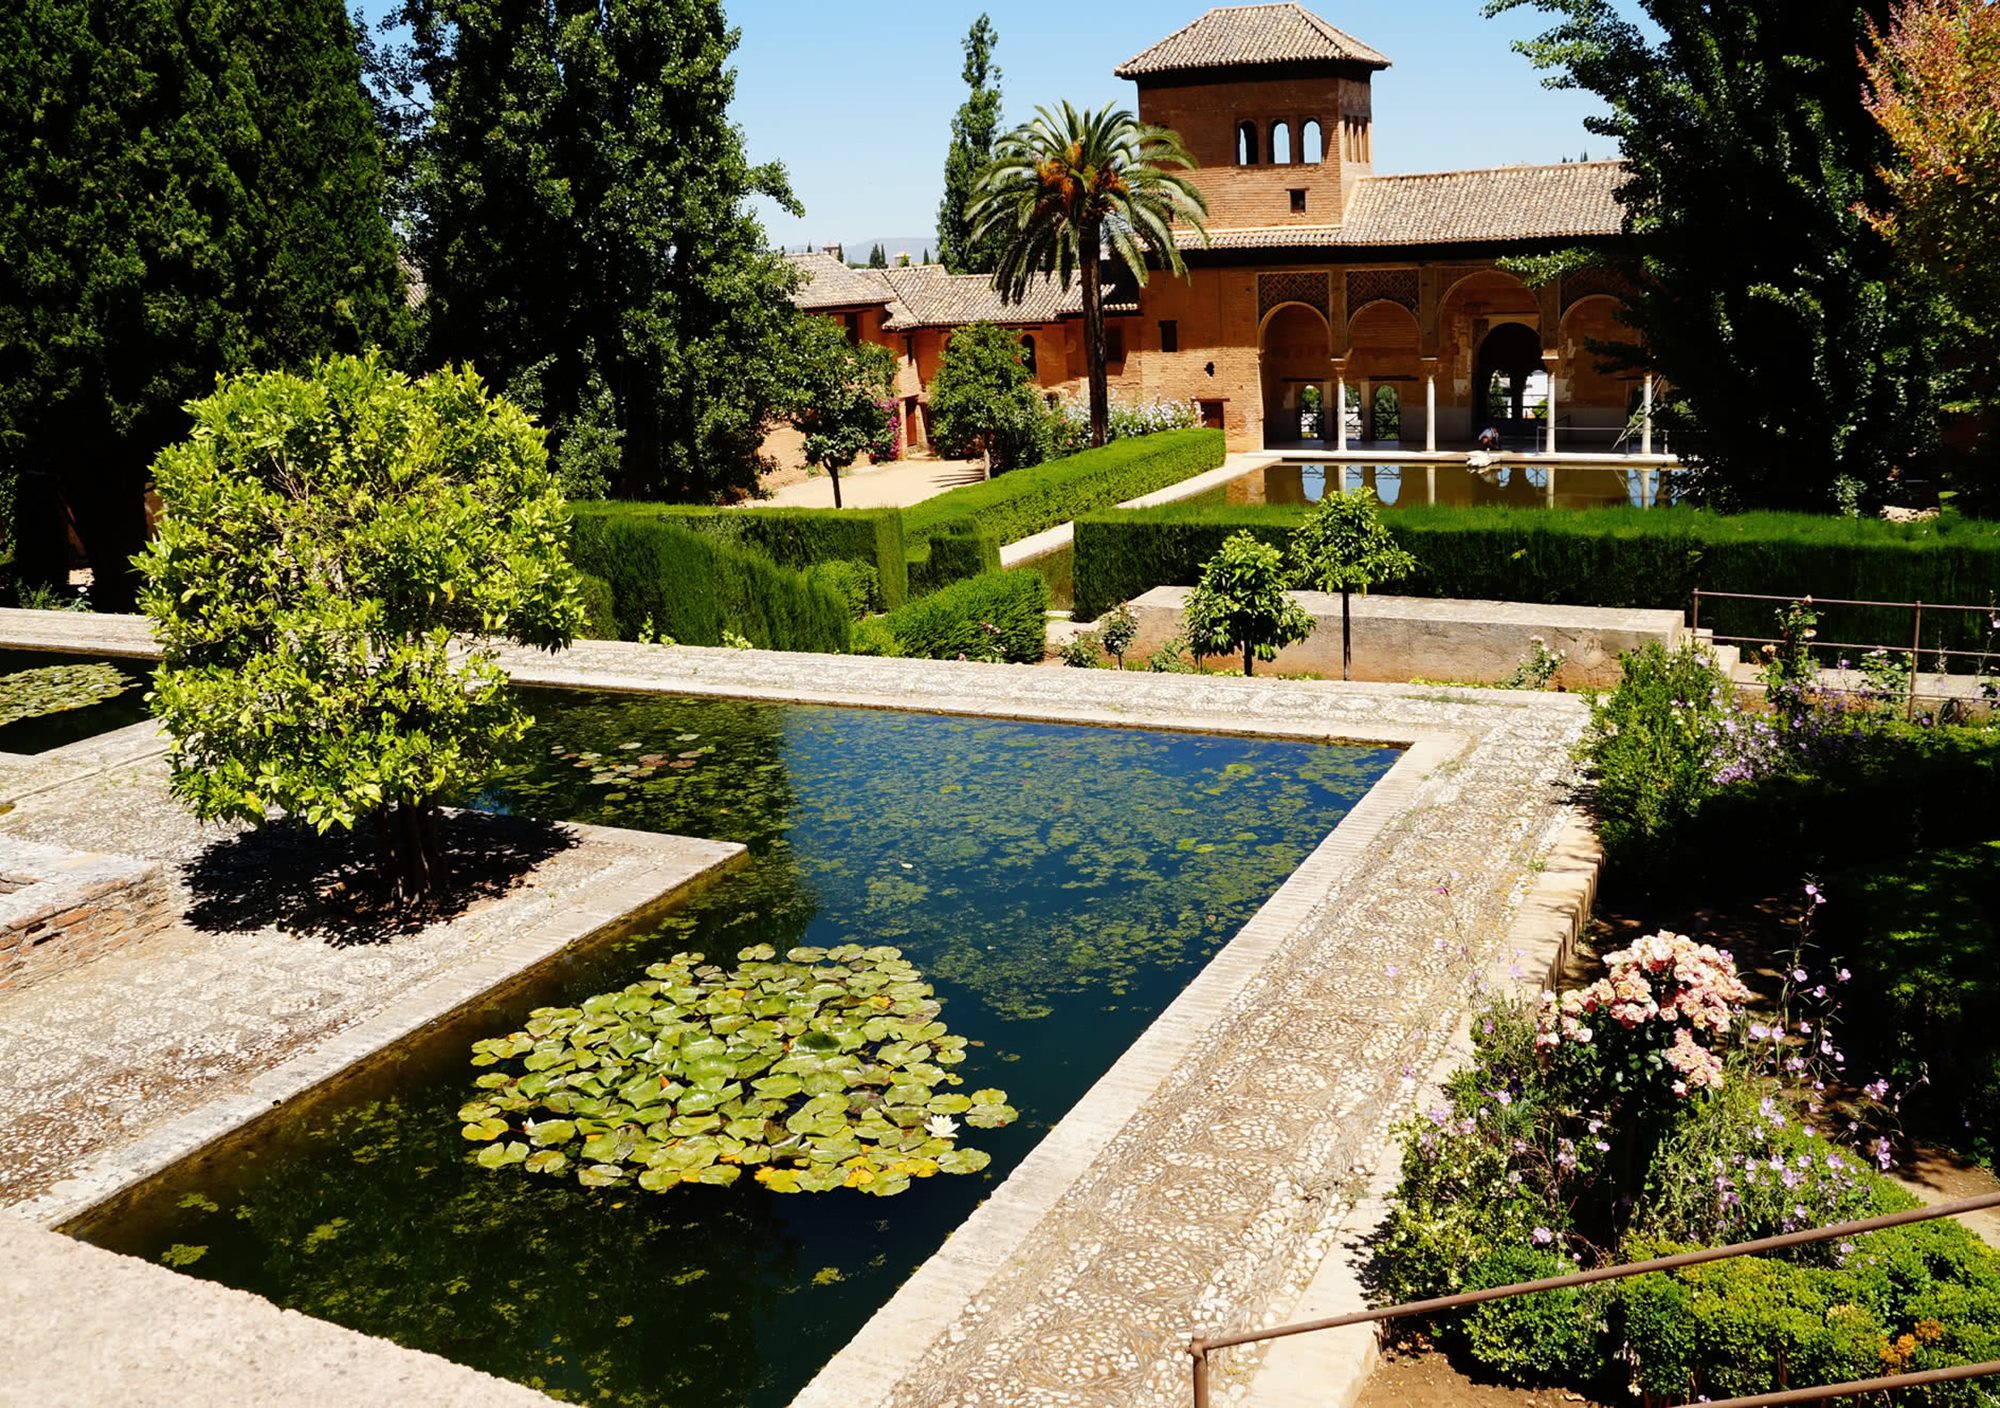 reservation Semi-private official guided tour visit Alhambra for small groups